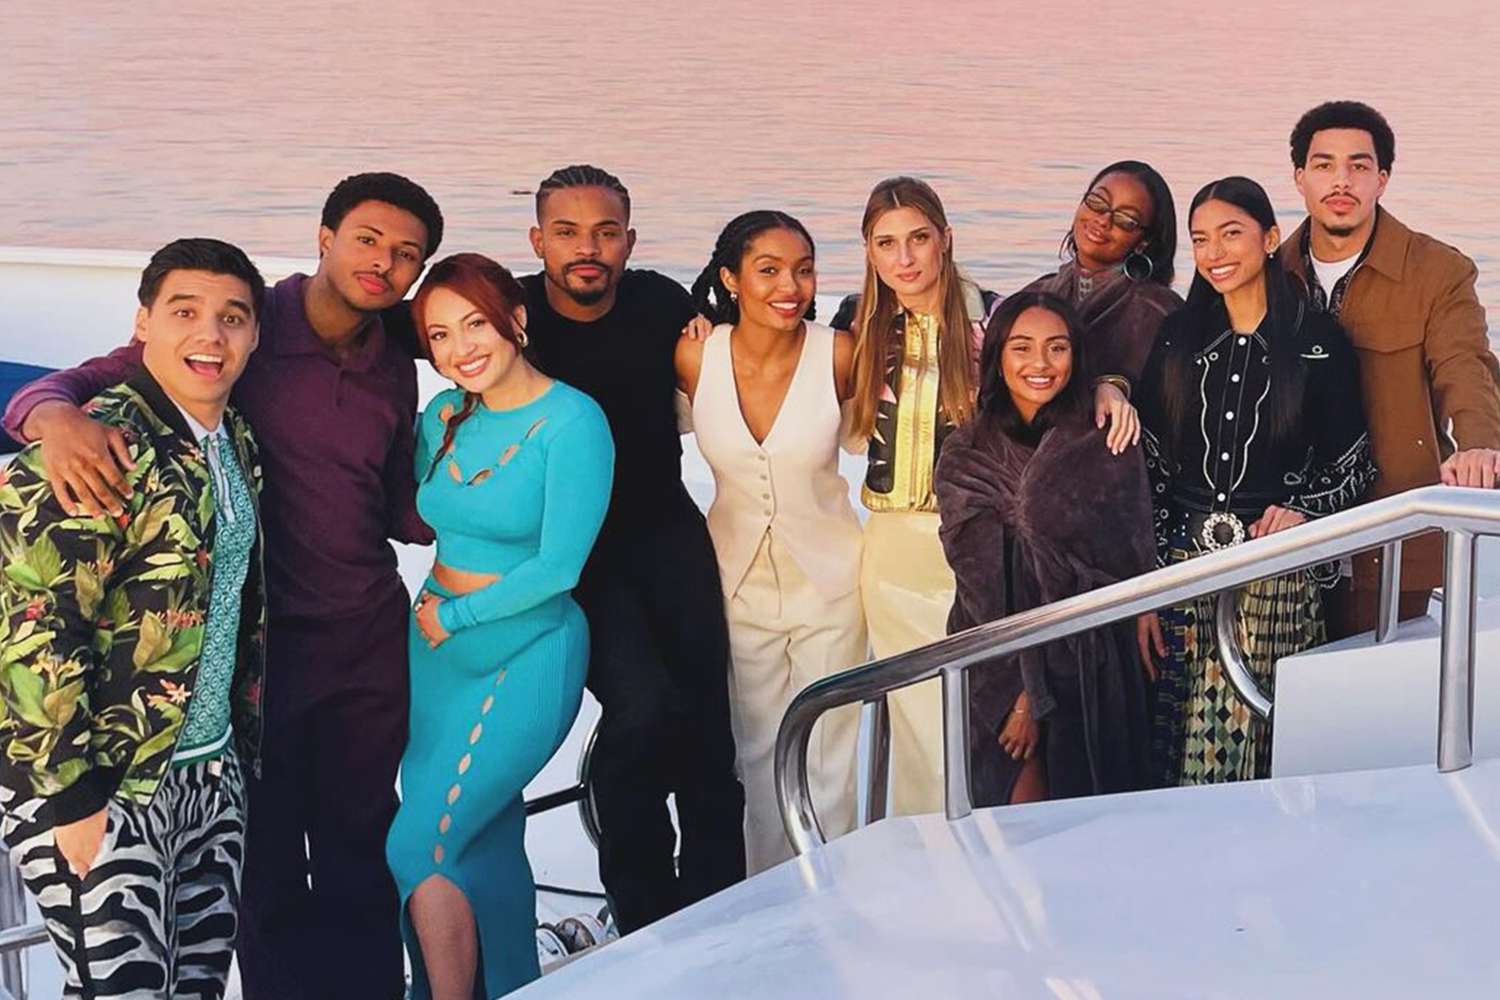 “Grown-ish” Stars Say Goodbye After Series Finale: 'Friends for Life'